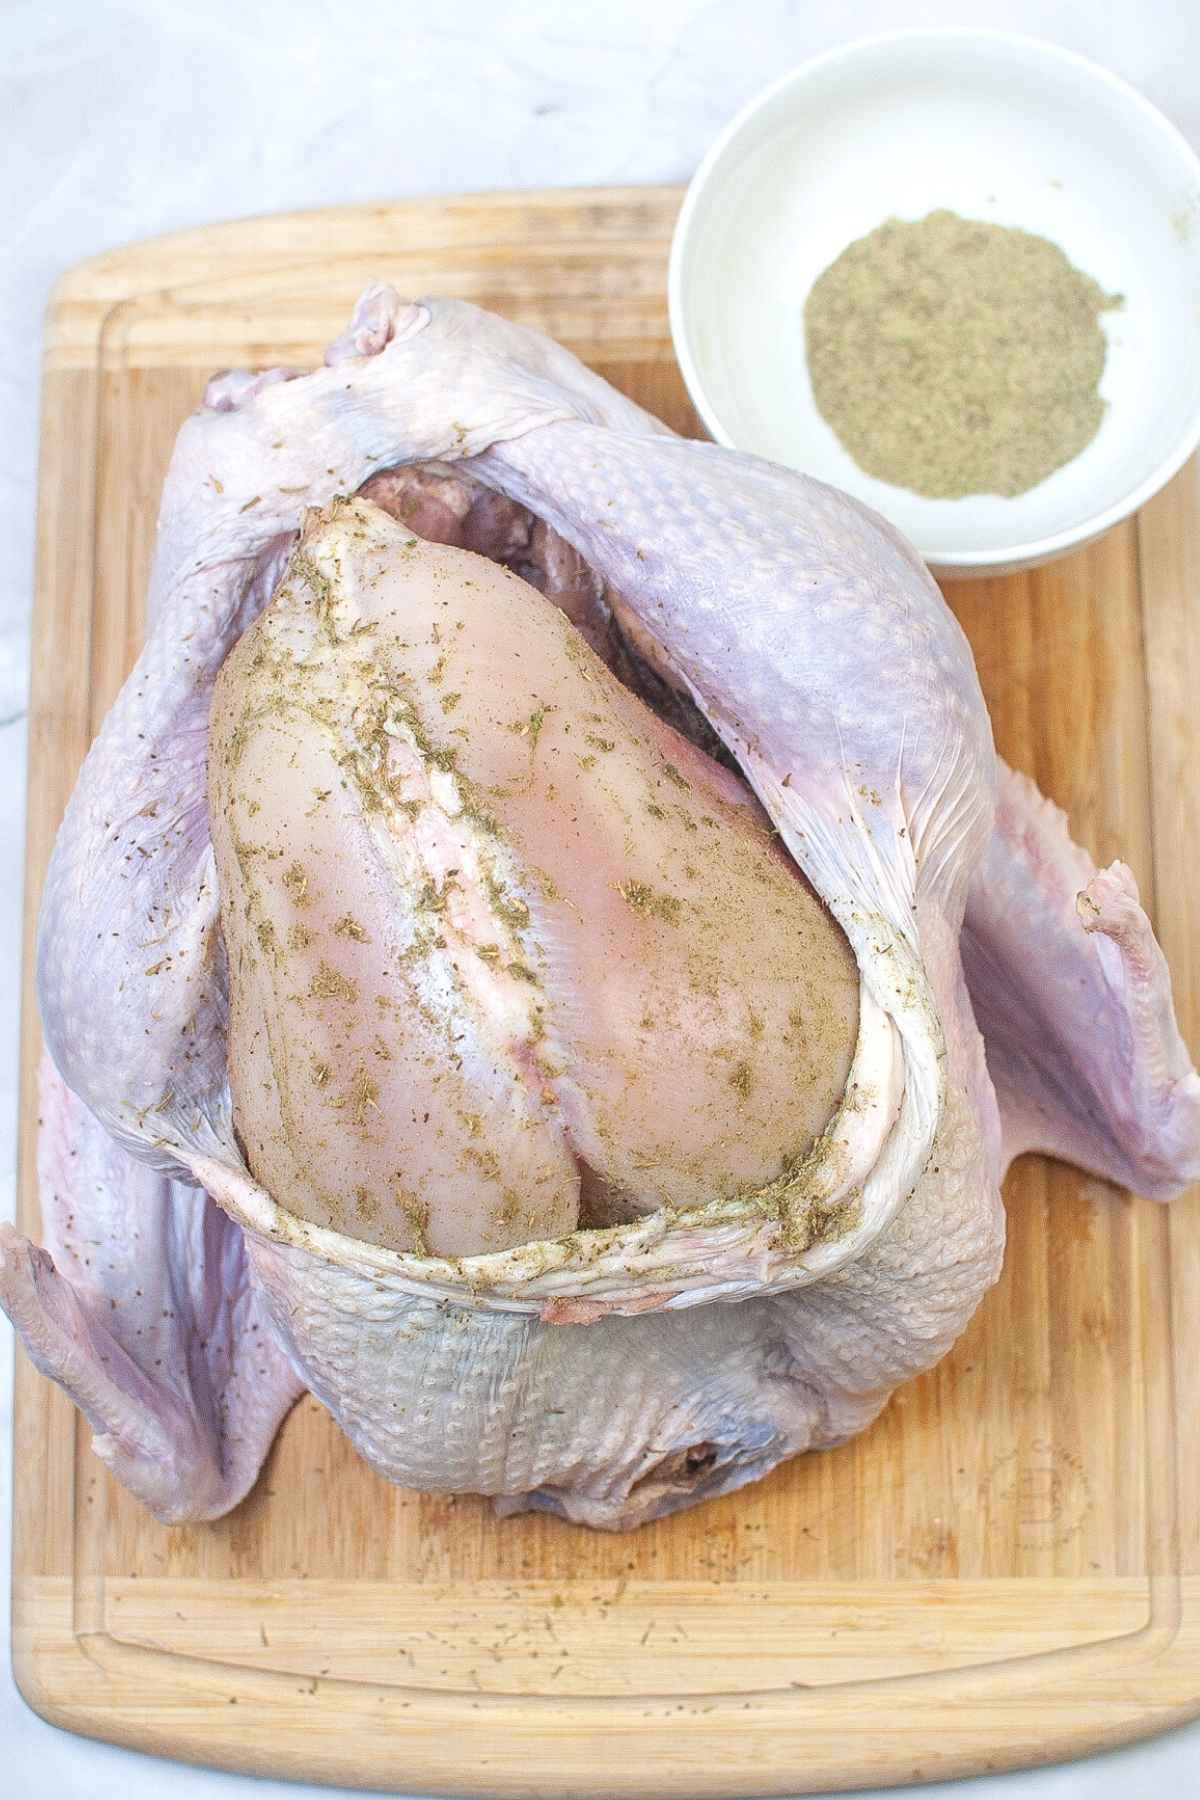 Whole raw turkey with skin pulled back on breast and rubbed with spices.